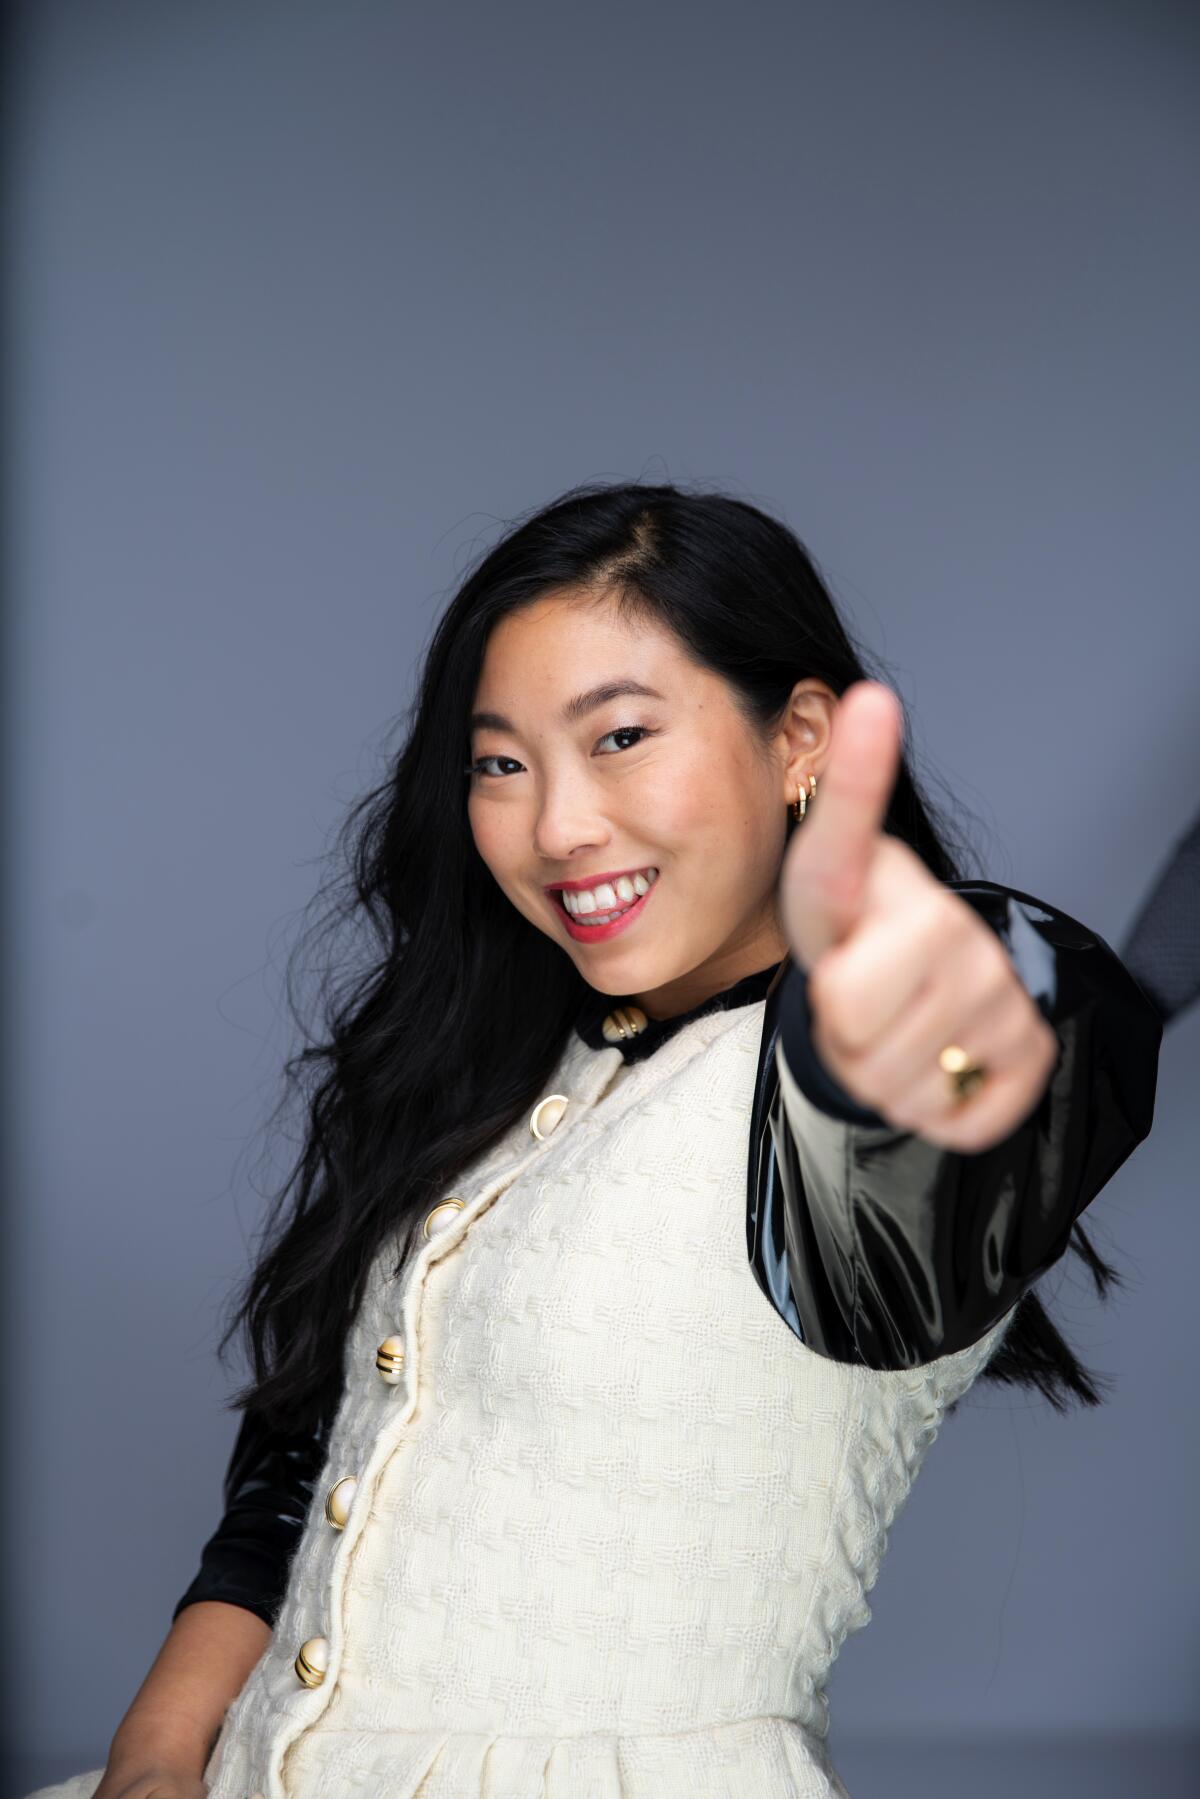 Awkwafina is among the comics featured in Comedy Central's "Call Your Mother."